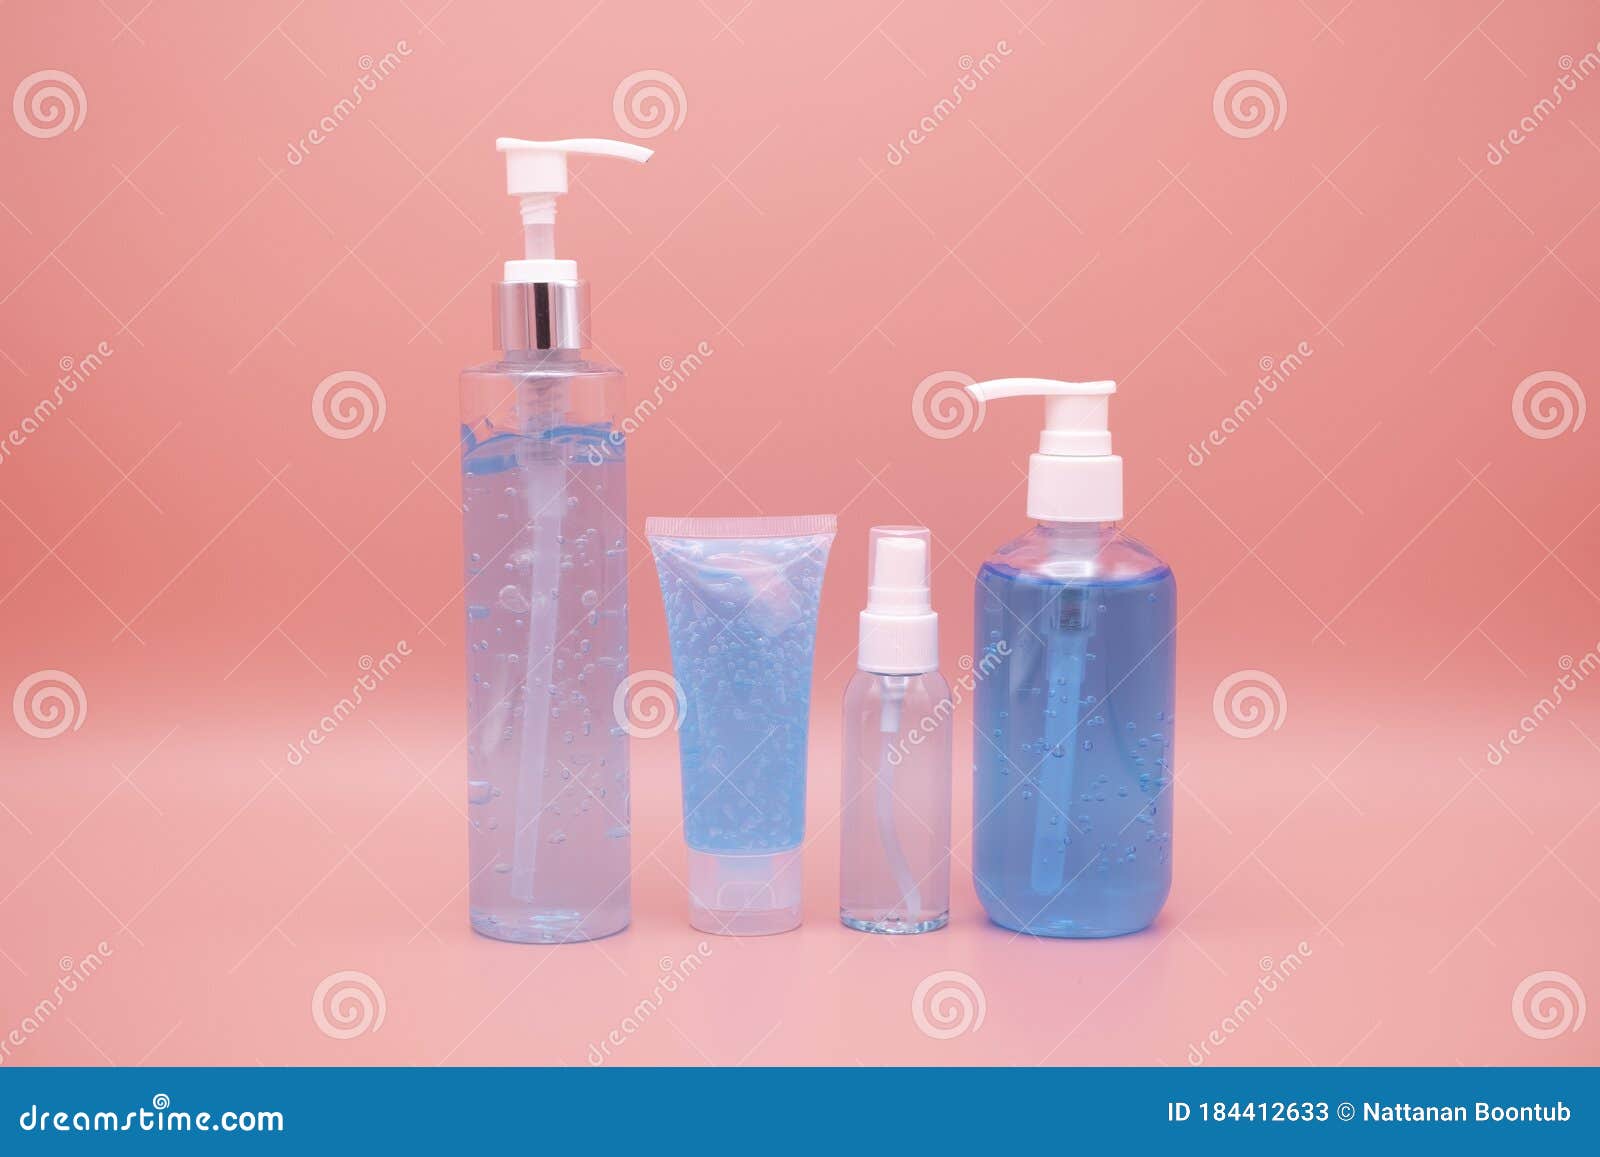 sanitizer gel pump dispenser. clear sanitizer in pump bottle, for killing germs, bacteria and virus. isolate on pink background